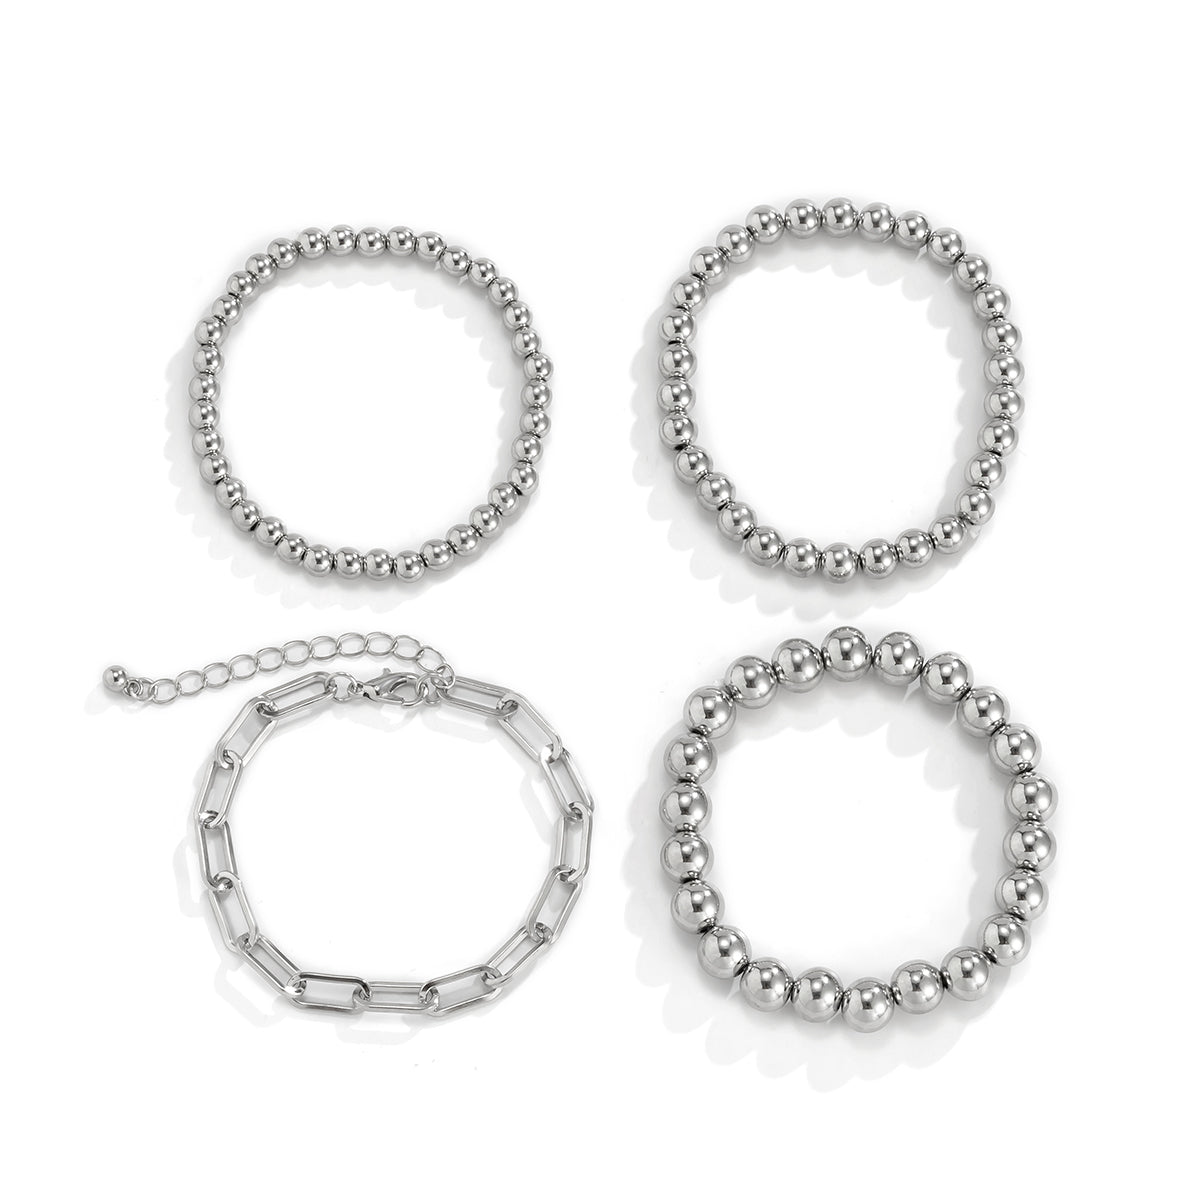 Silver-Plated Beaded Chain Stretch Bracelet Set